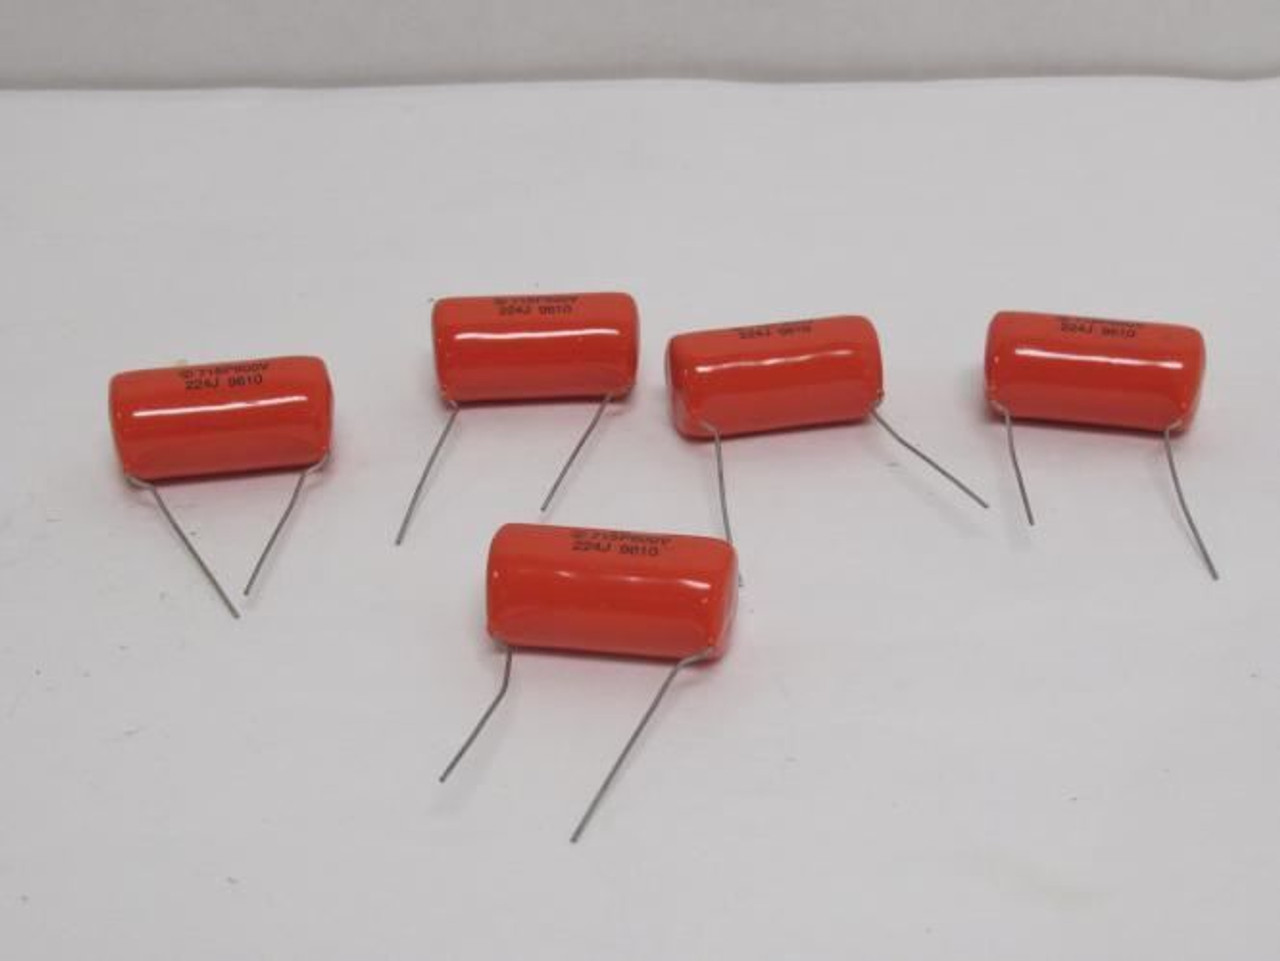 Cornell-Dubilier 715P15456MD3; Lot-5 Polypro Film Capacitors